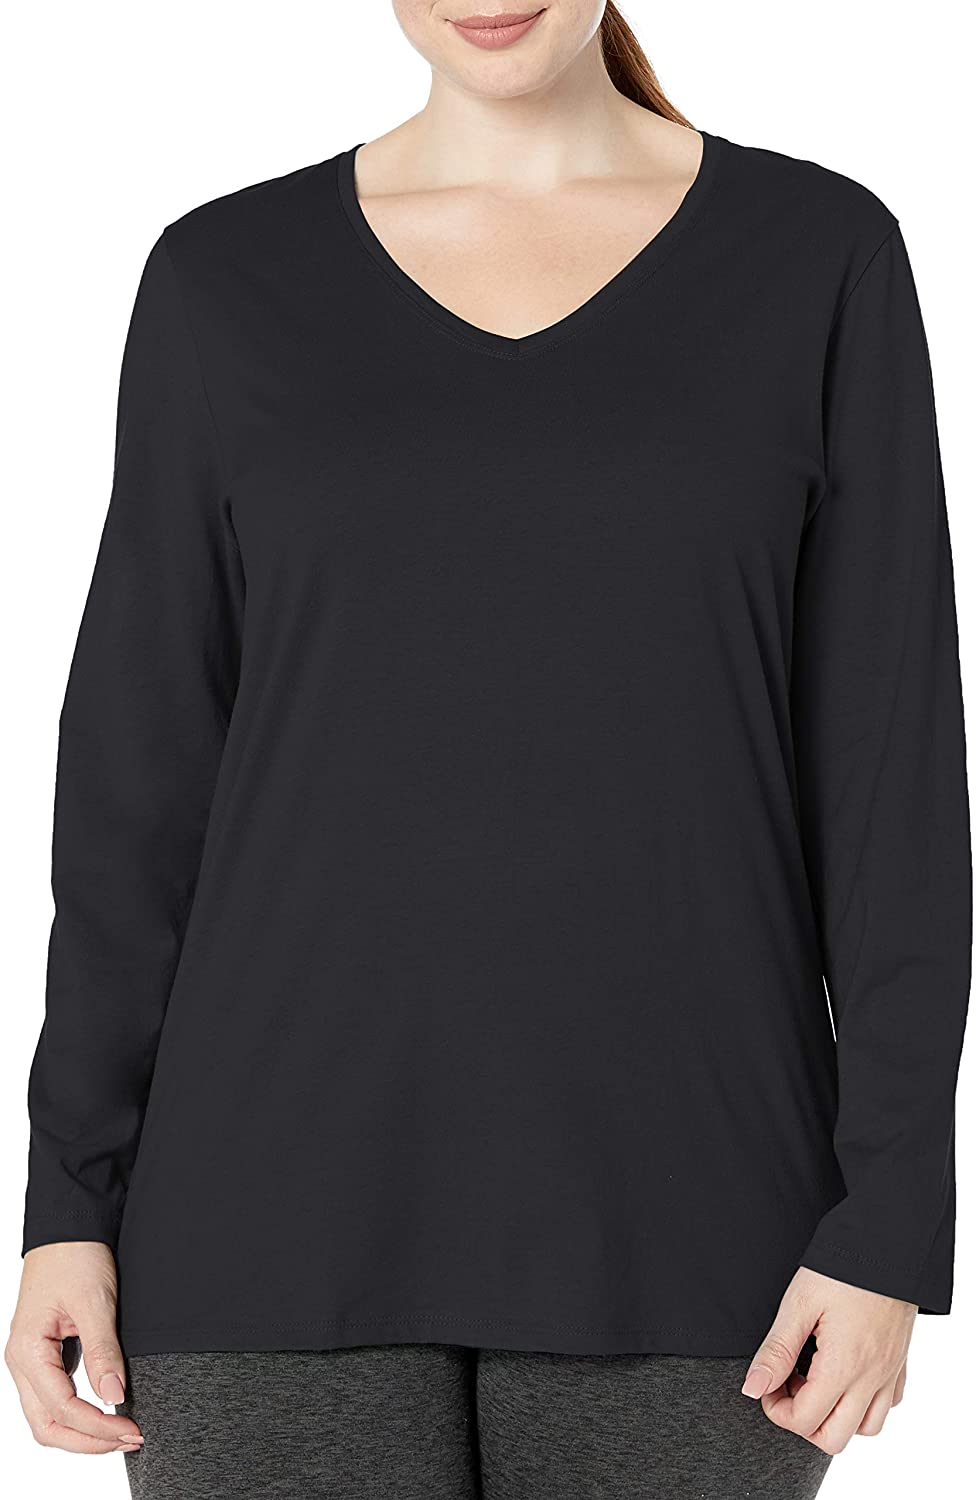 Price:$8.00 JUST MY SIZE Women's Plus Size Vneck Long Sleeve Tee at Amazon Women’s Clothing store